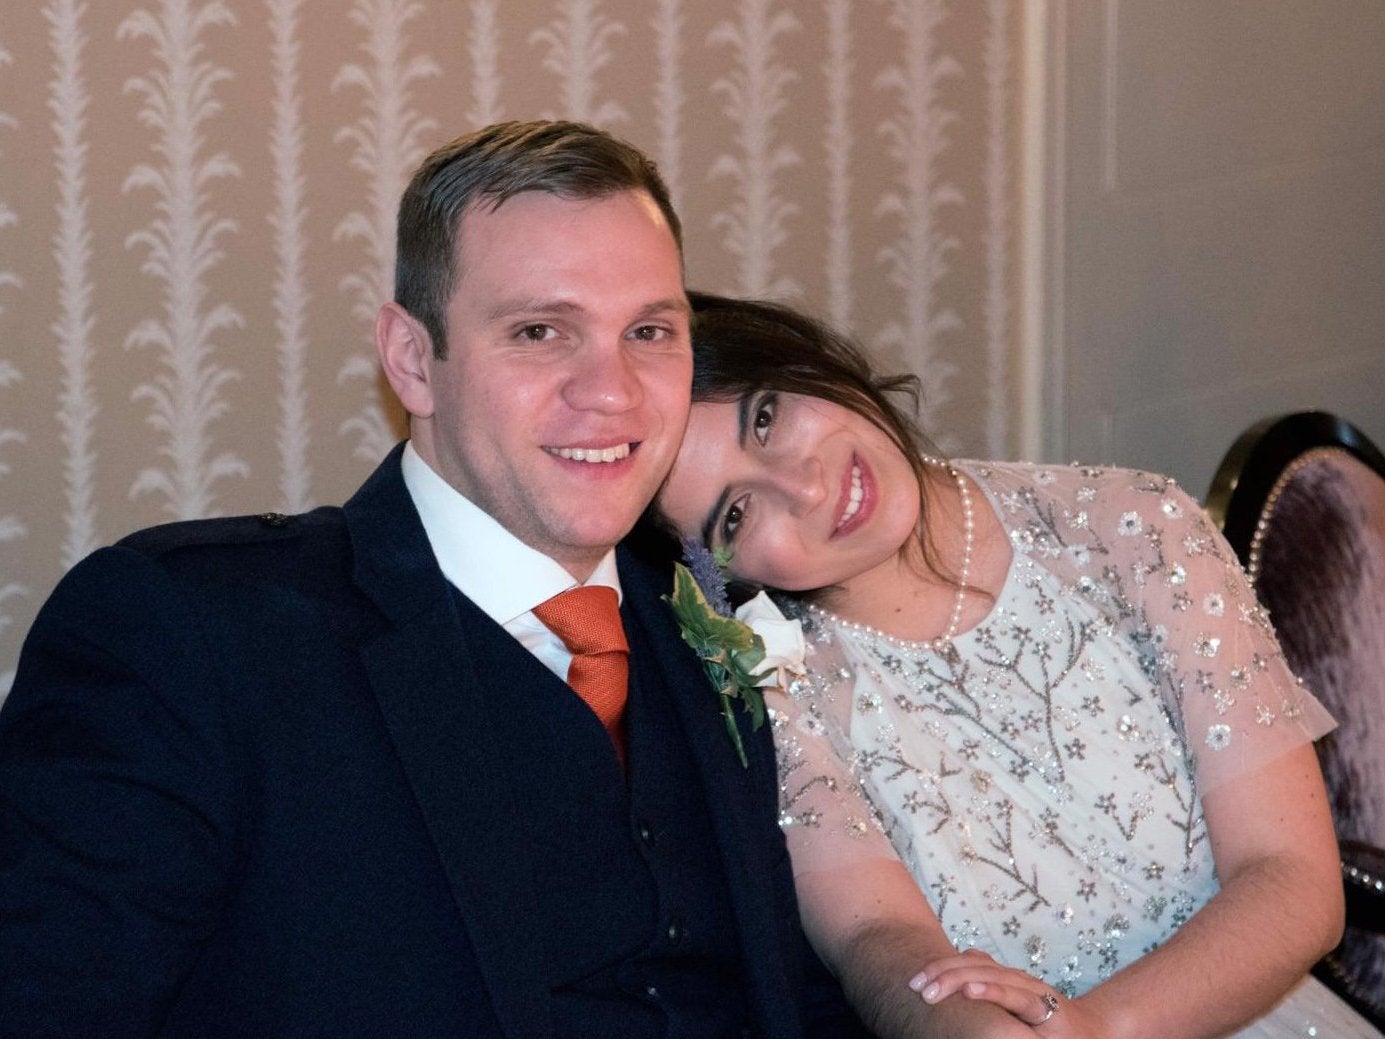 Matthew Hedges with his wife Daniela Tejada. The PhD student was arrested at Dubai airport after travelling to the UAE to interview sources about the country's foreign policy and security strategy